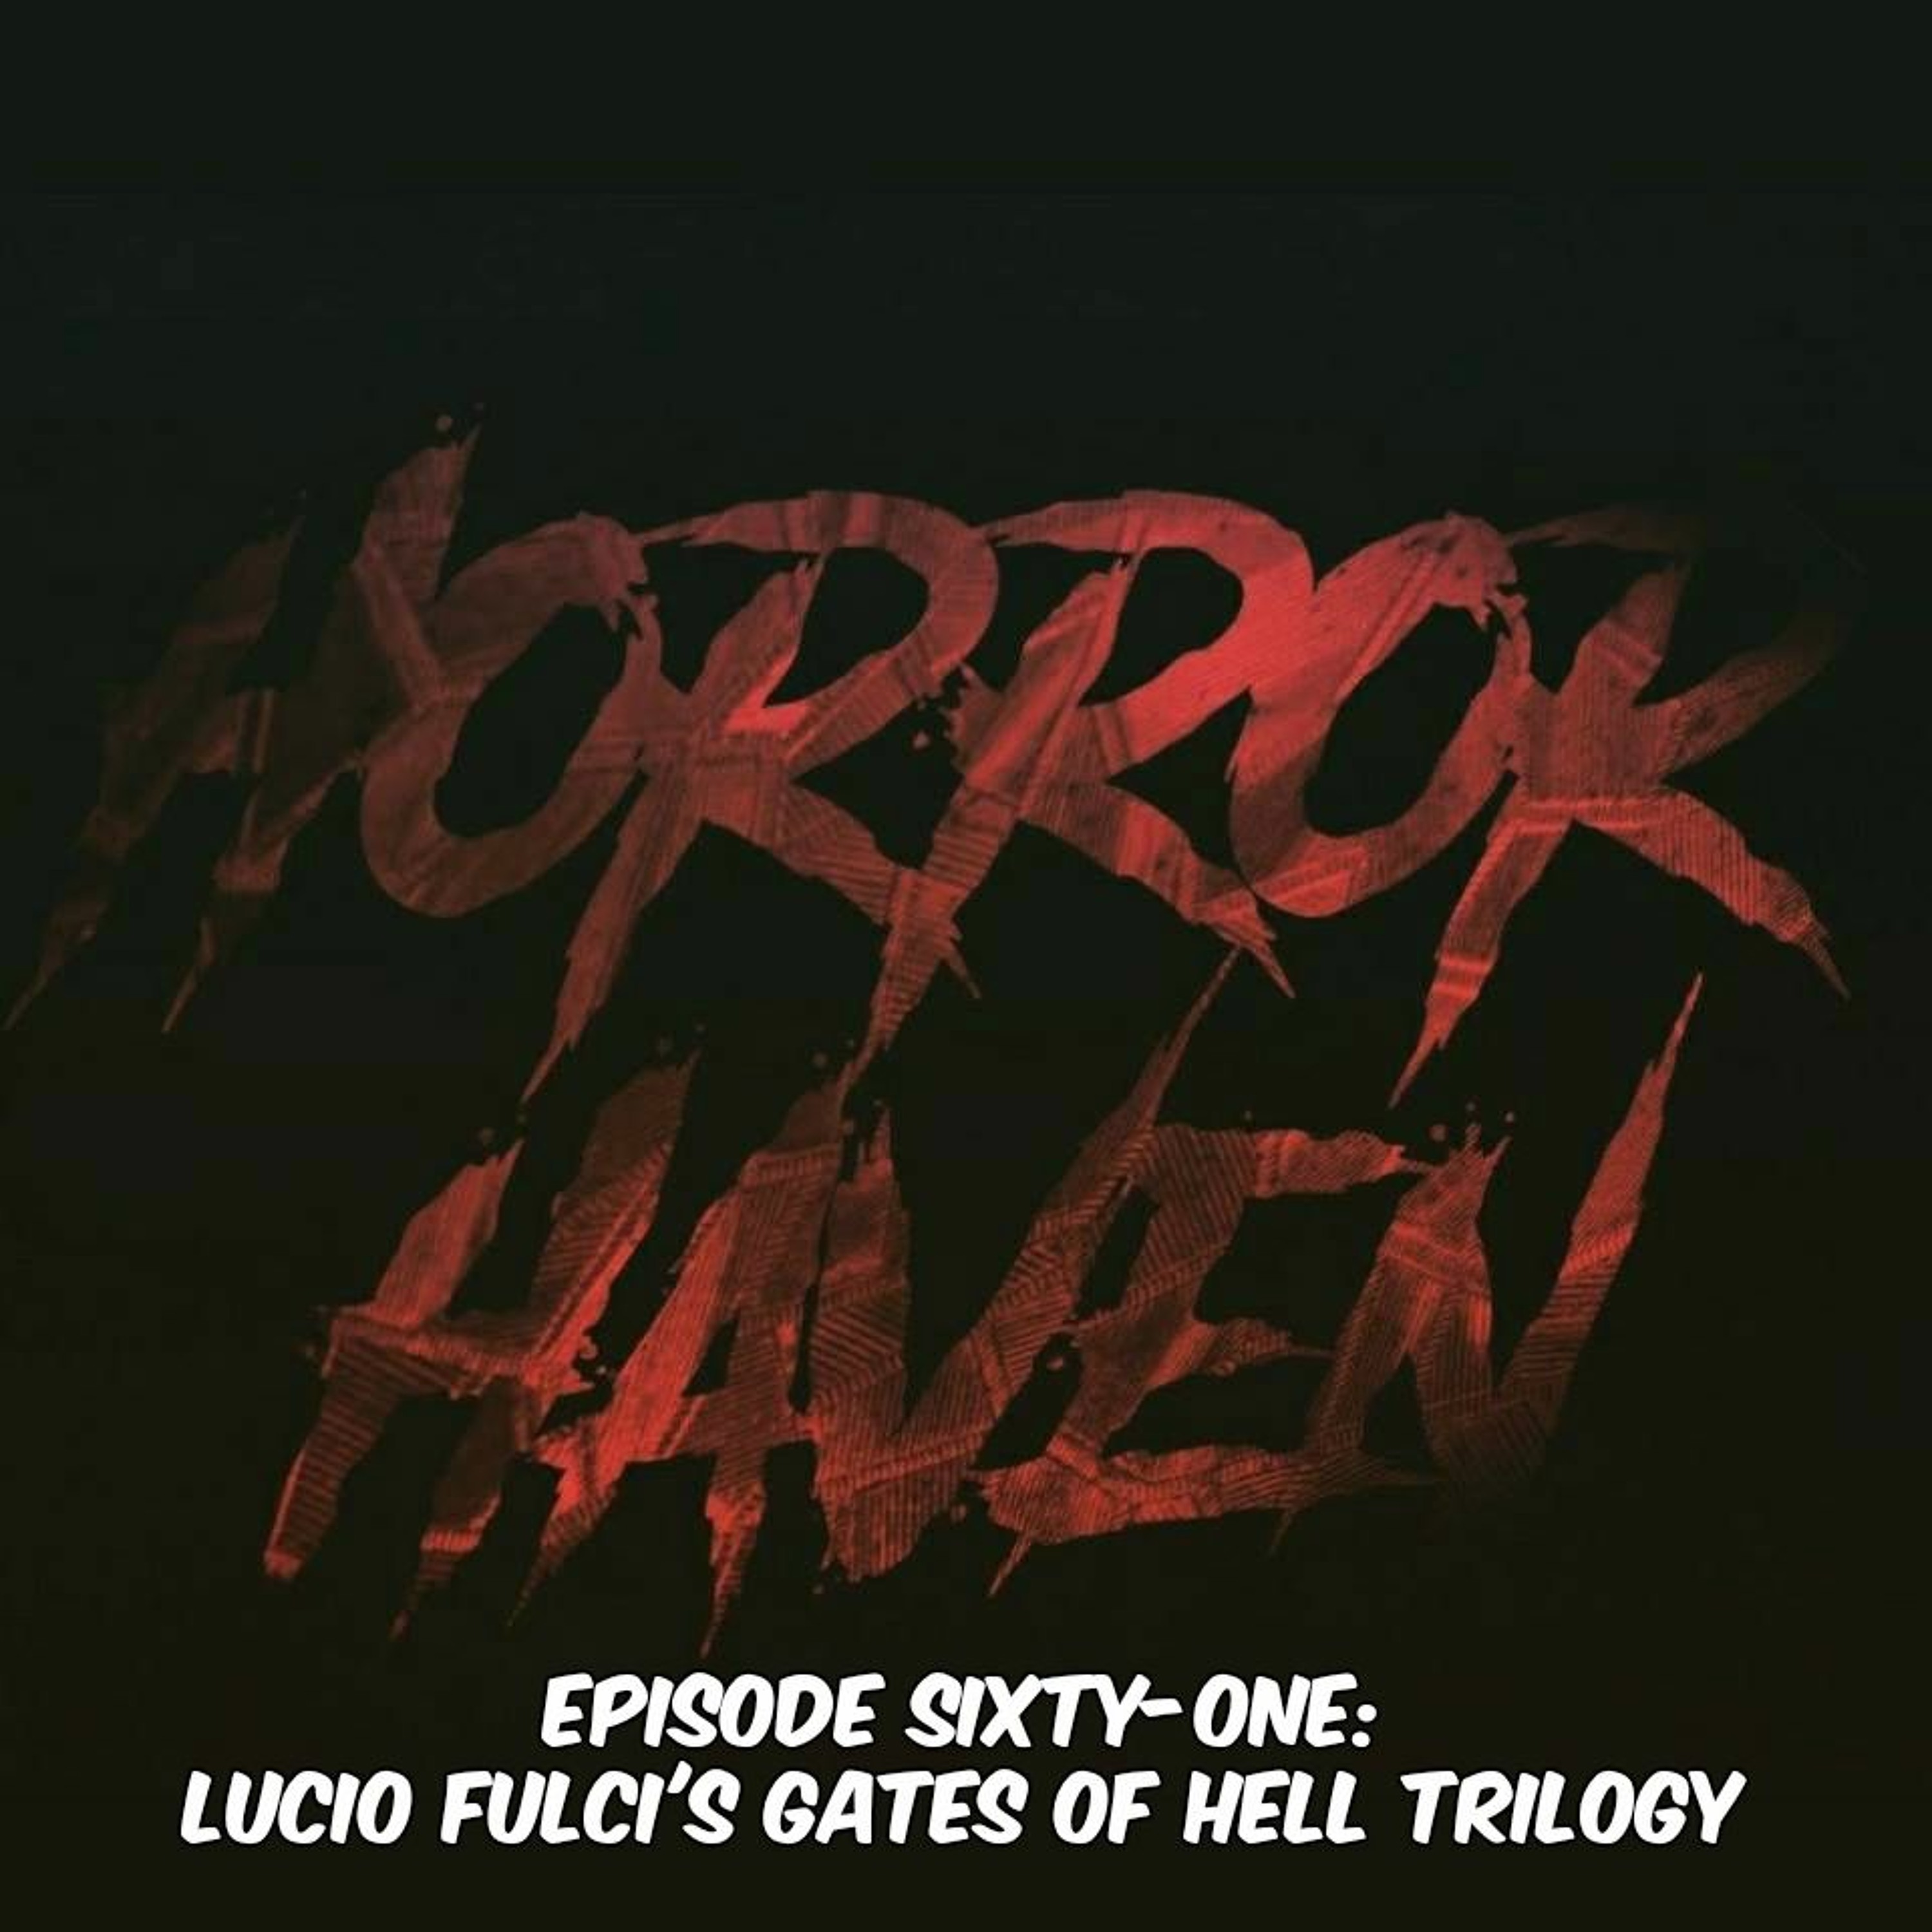 Episode Sixty-One:  Lucio Fulci’s Gates of Hell Trilogy